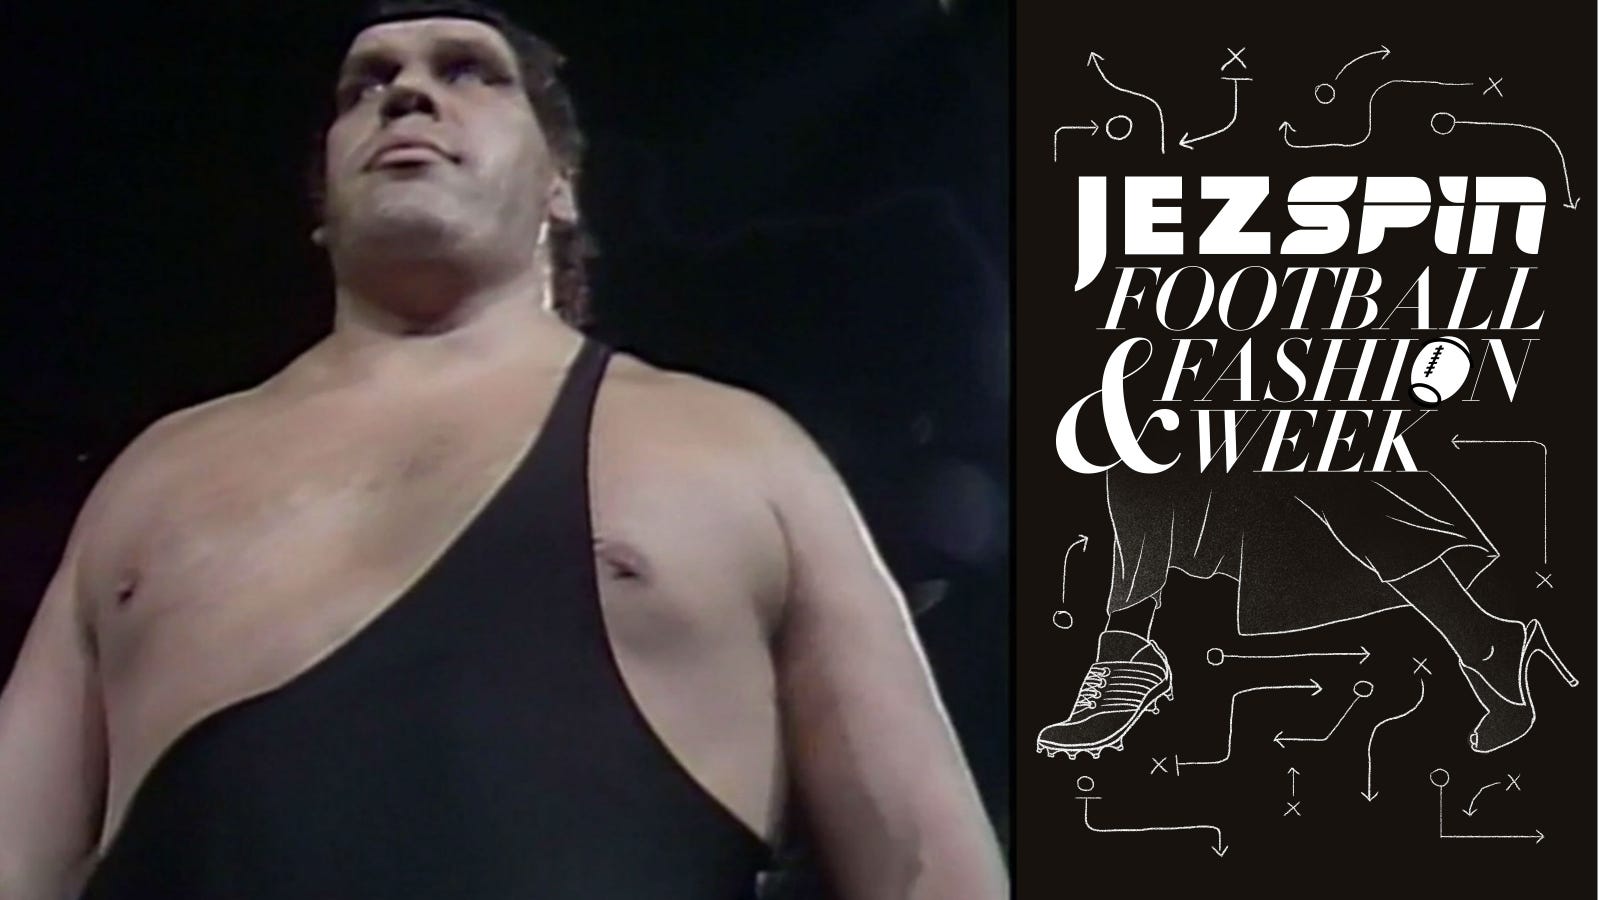 Andre The Giant Wrestler Should Not Be Your Fashion Icon